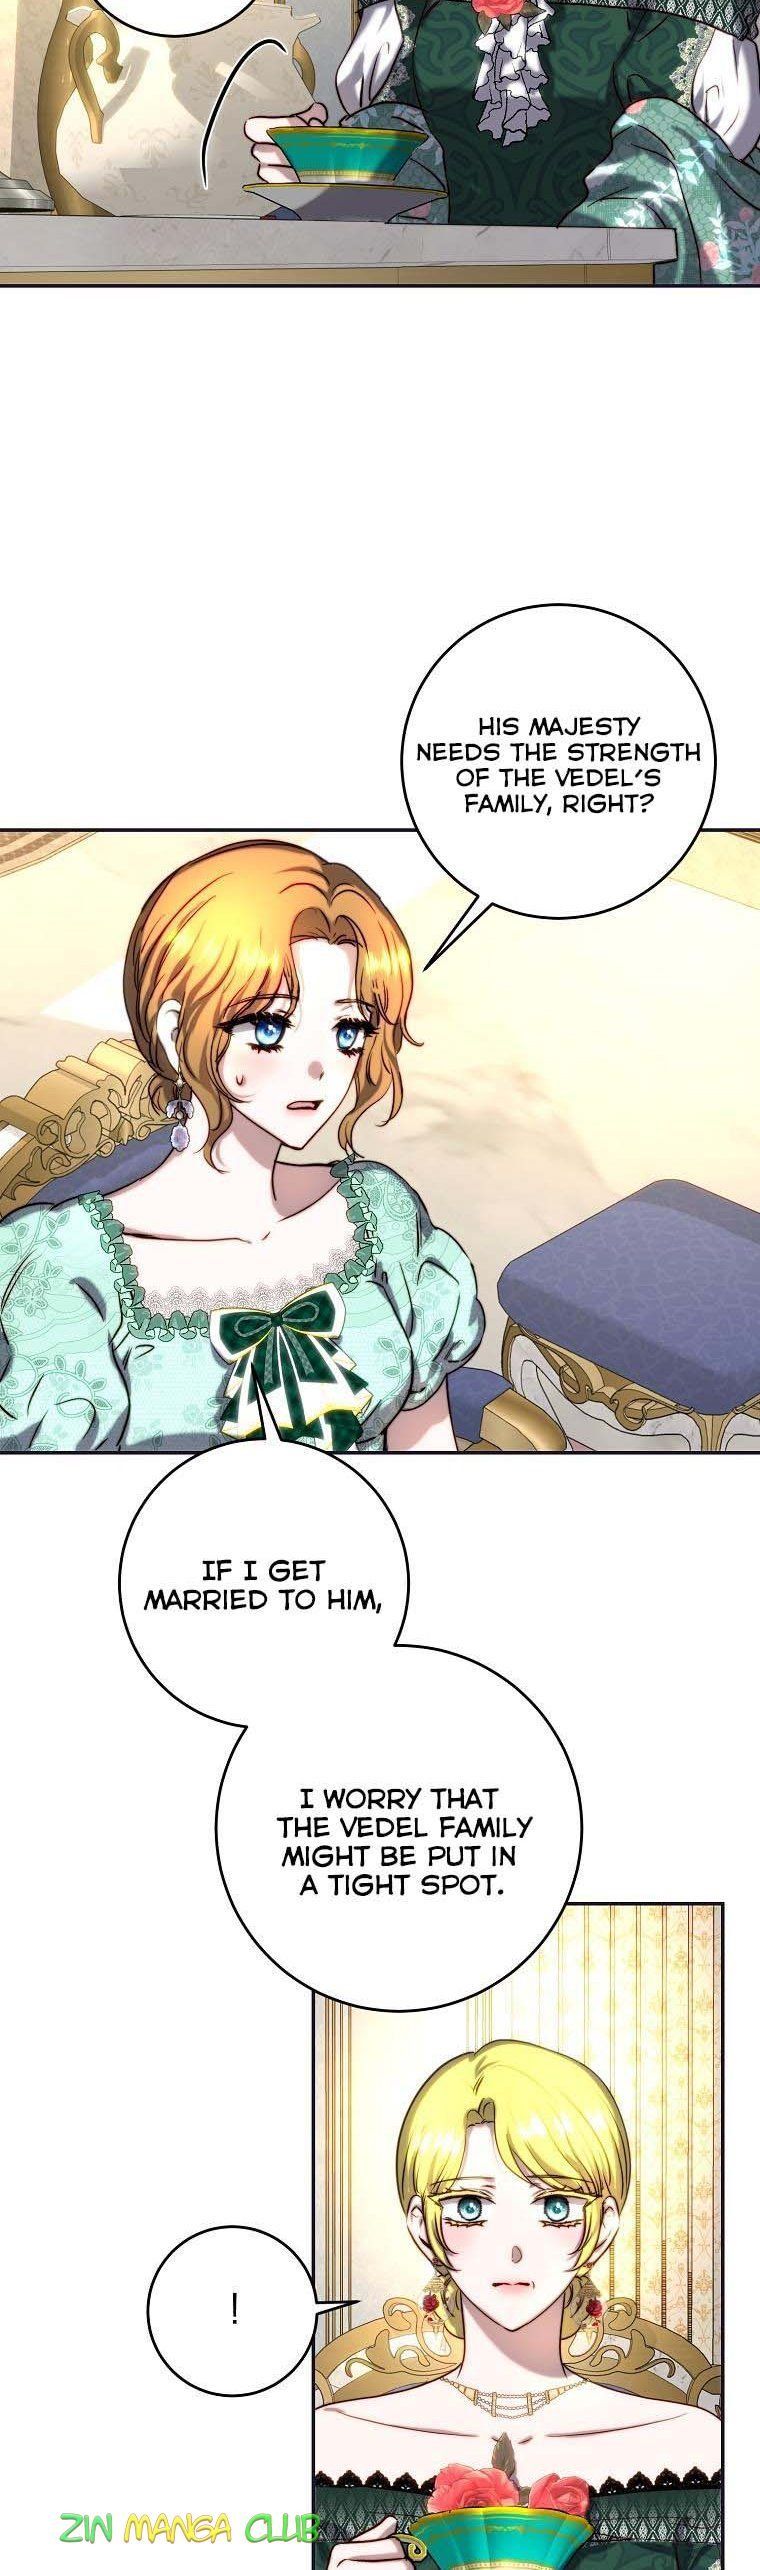 The Princess Blooms as a Crazy Flower Chapter 43 page 2